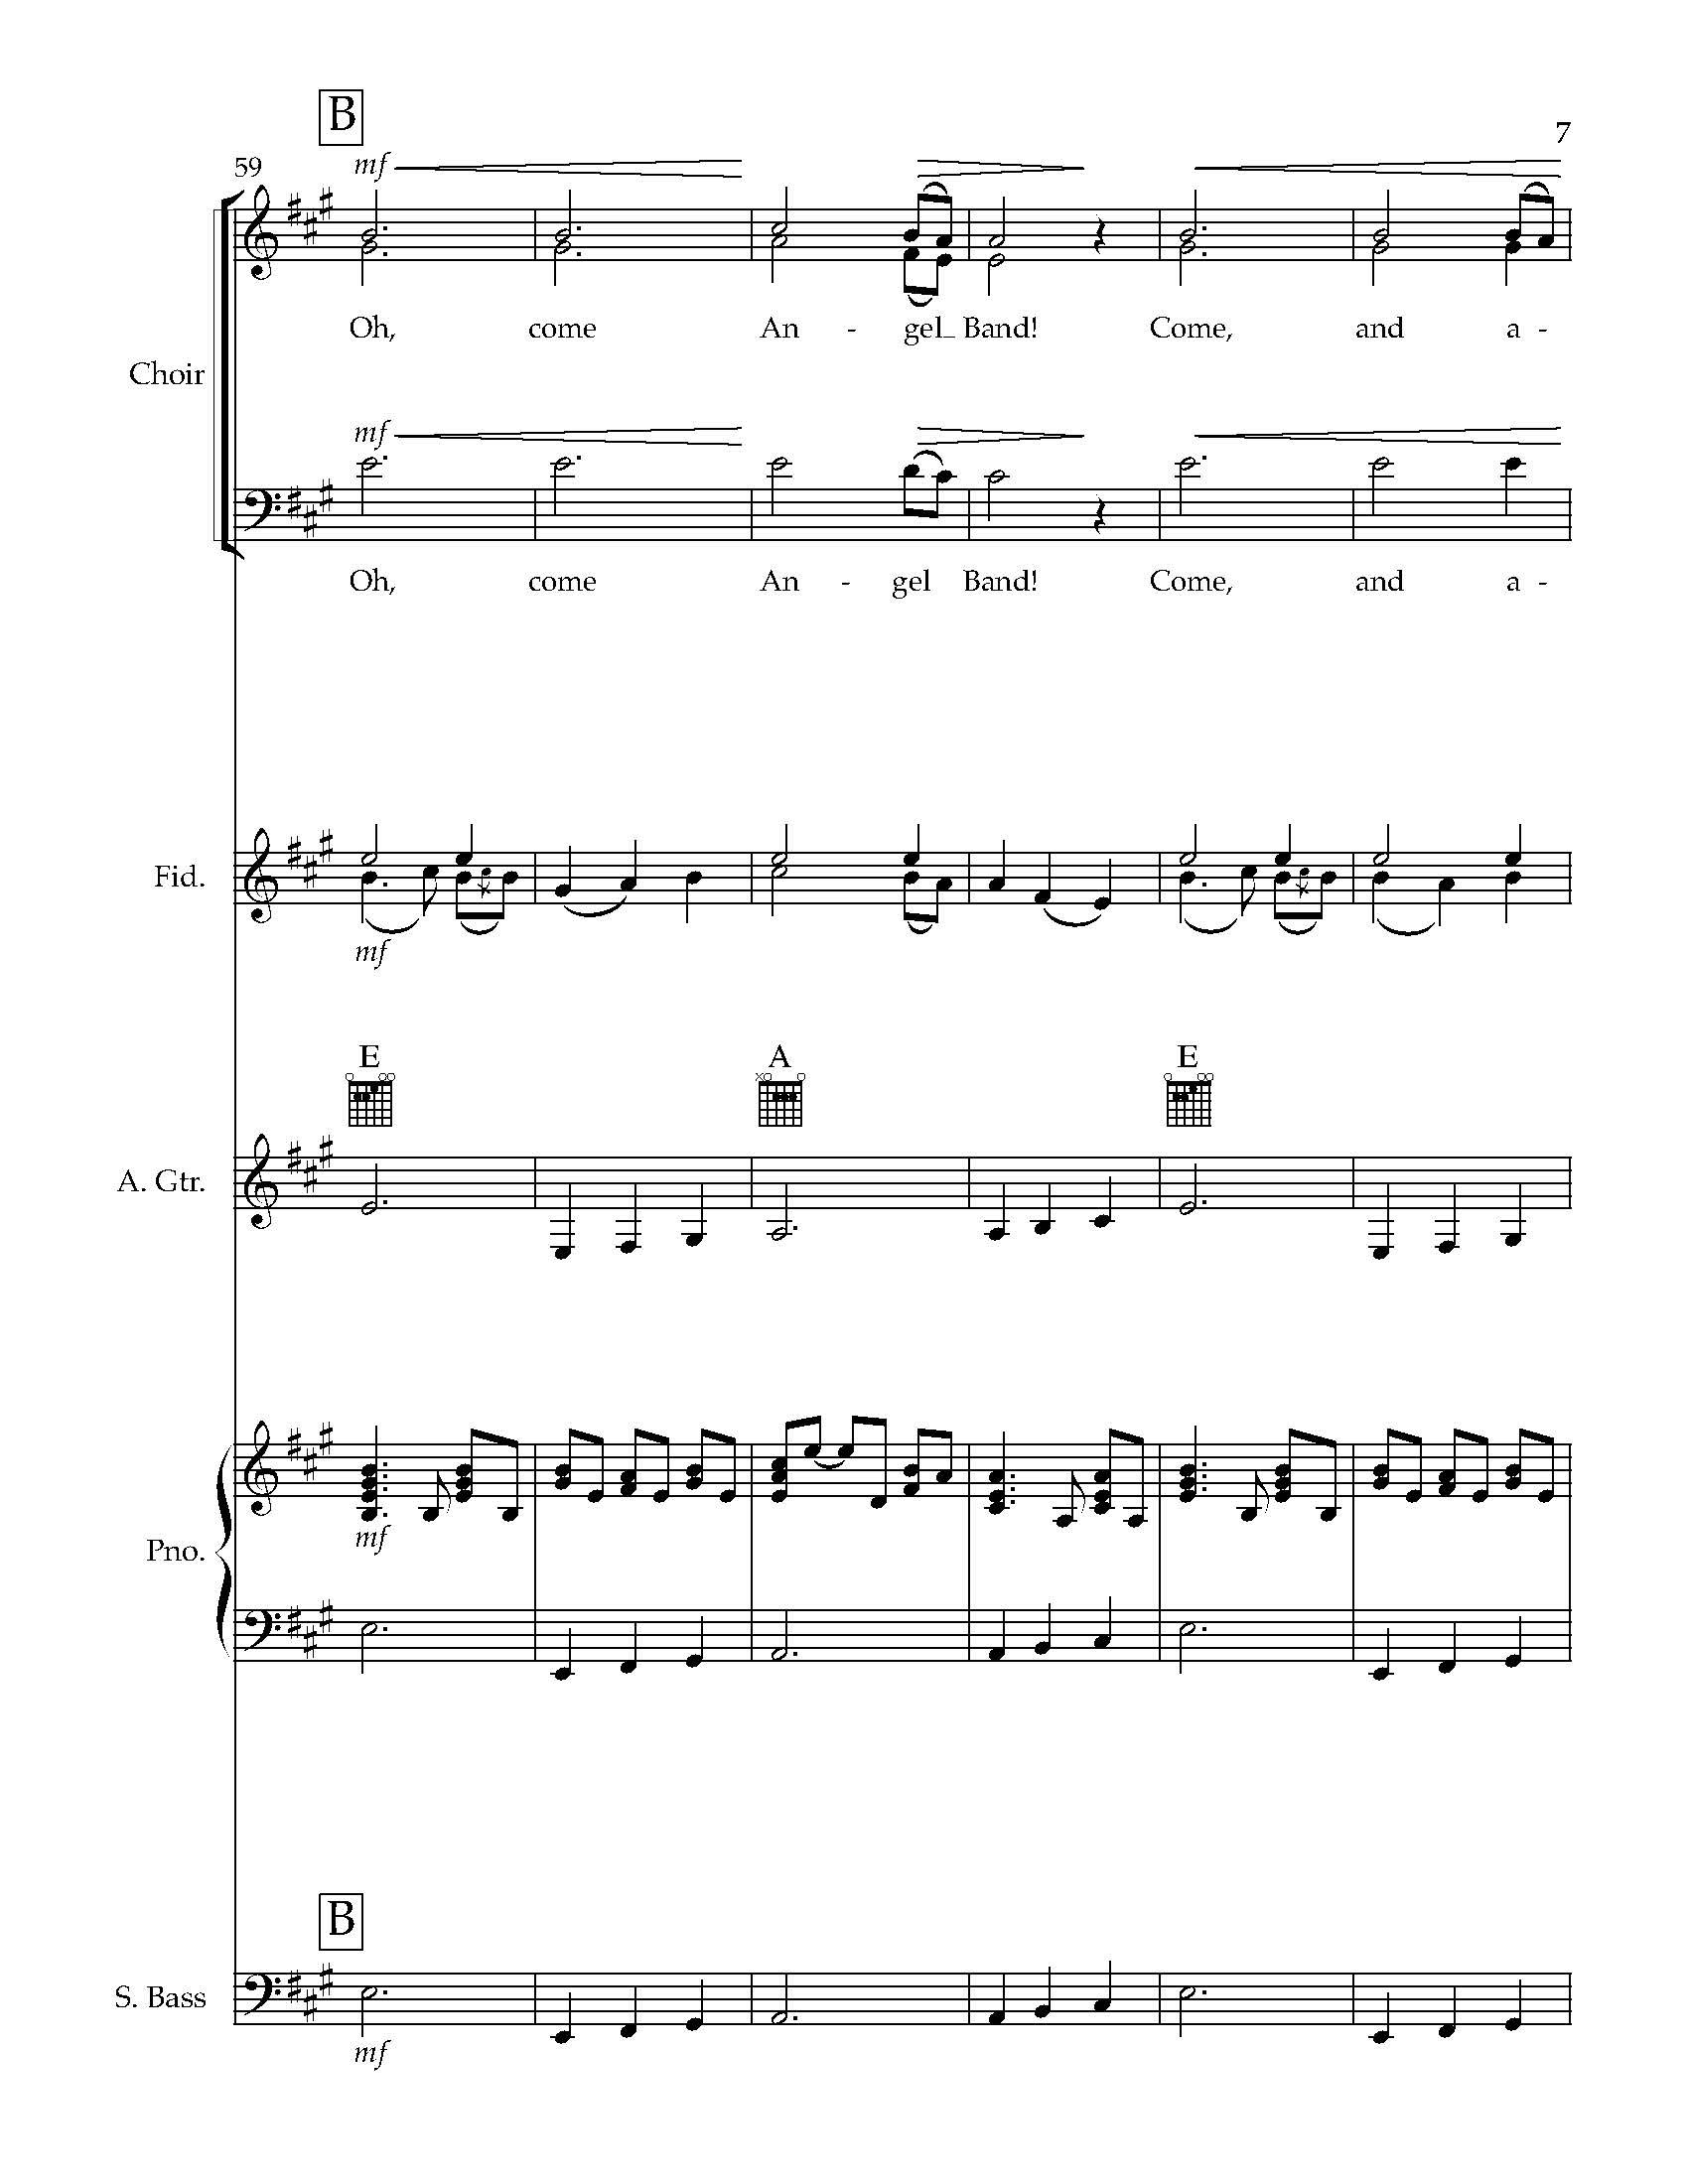 FULL SCORE preview - Angel Band for choir, fiddle, piano, guitar, and bass - arr_Page_07.jpg